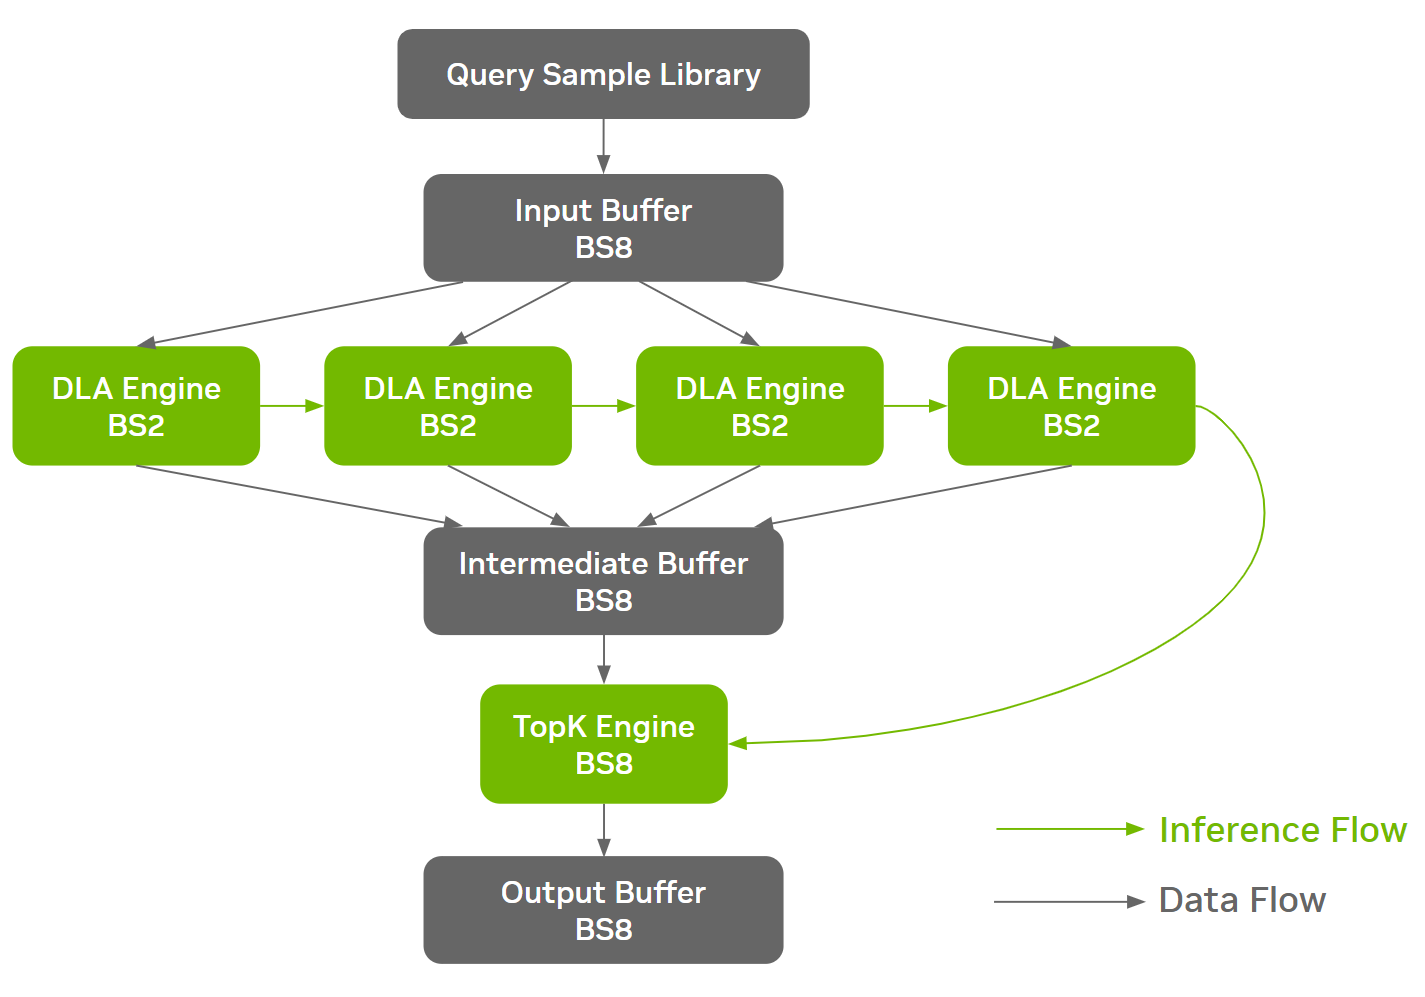 A diagram showing the inference flow, data flow, and buffer management method used in the NVIDIA MLPerf Inference v3.0 submission. 
